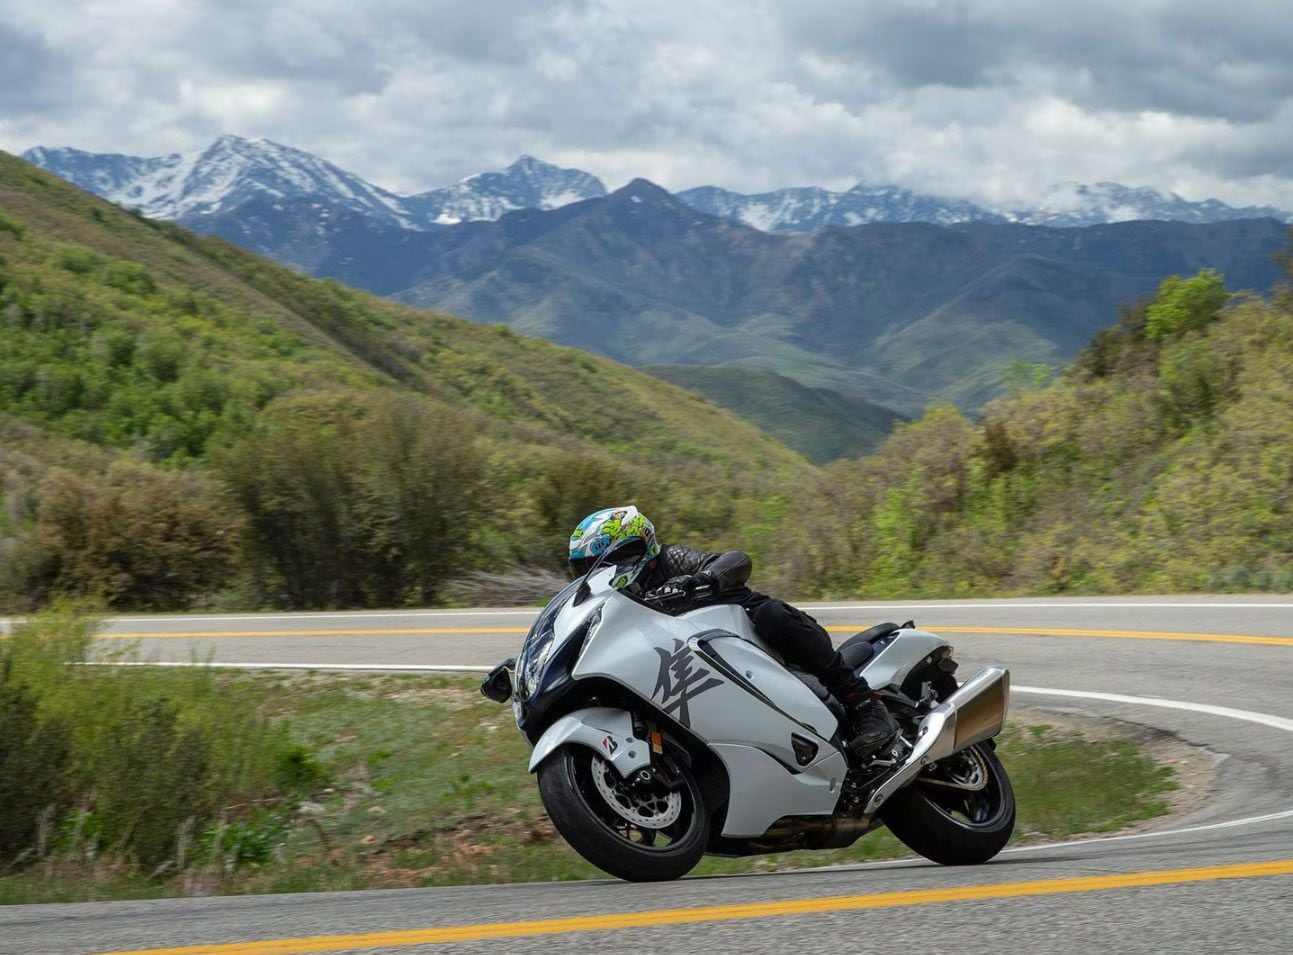 If the Hayabusa is good enough for Spy Barbie, it’s good enough for your next road trip.